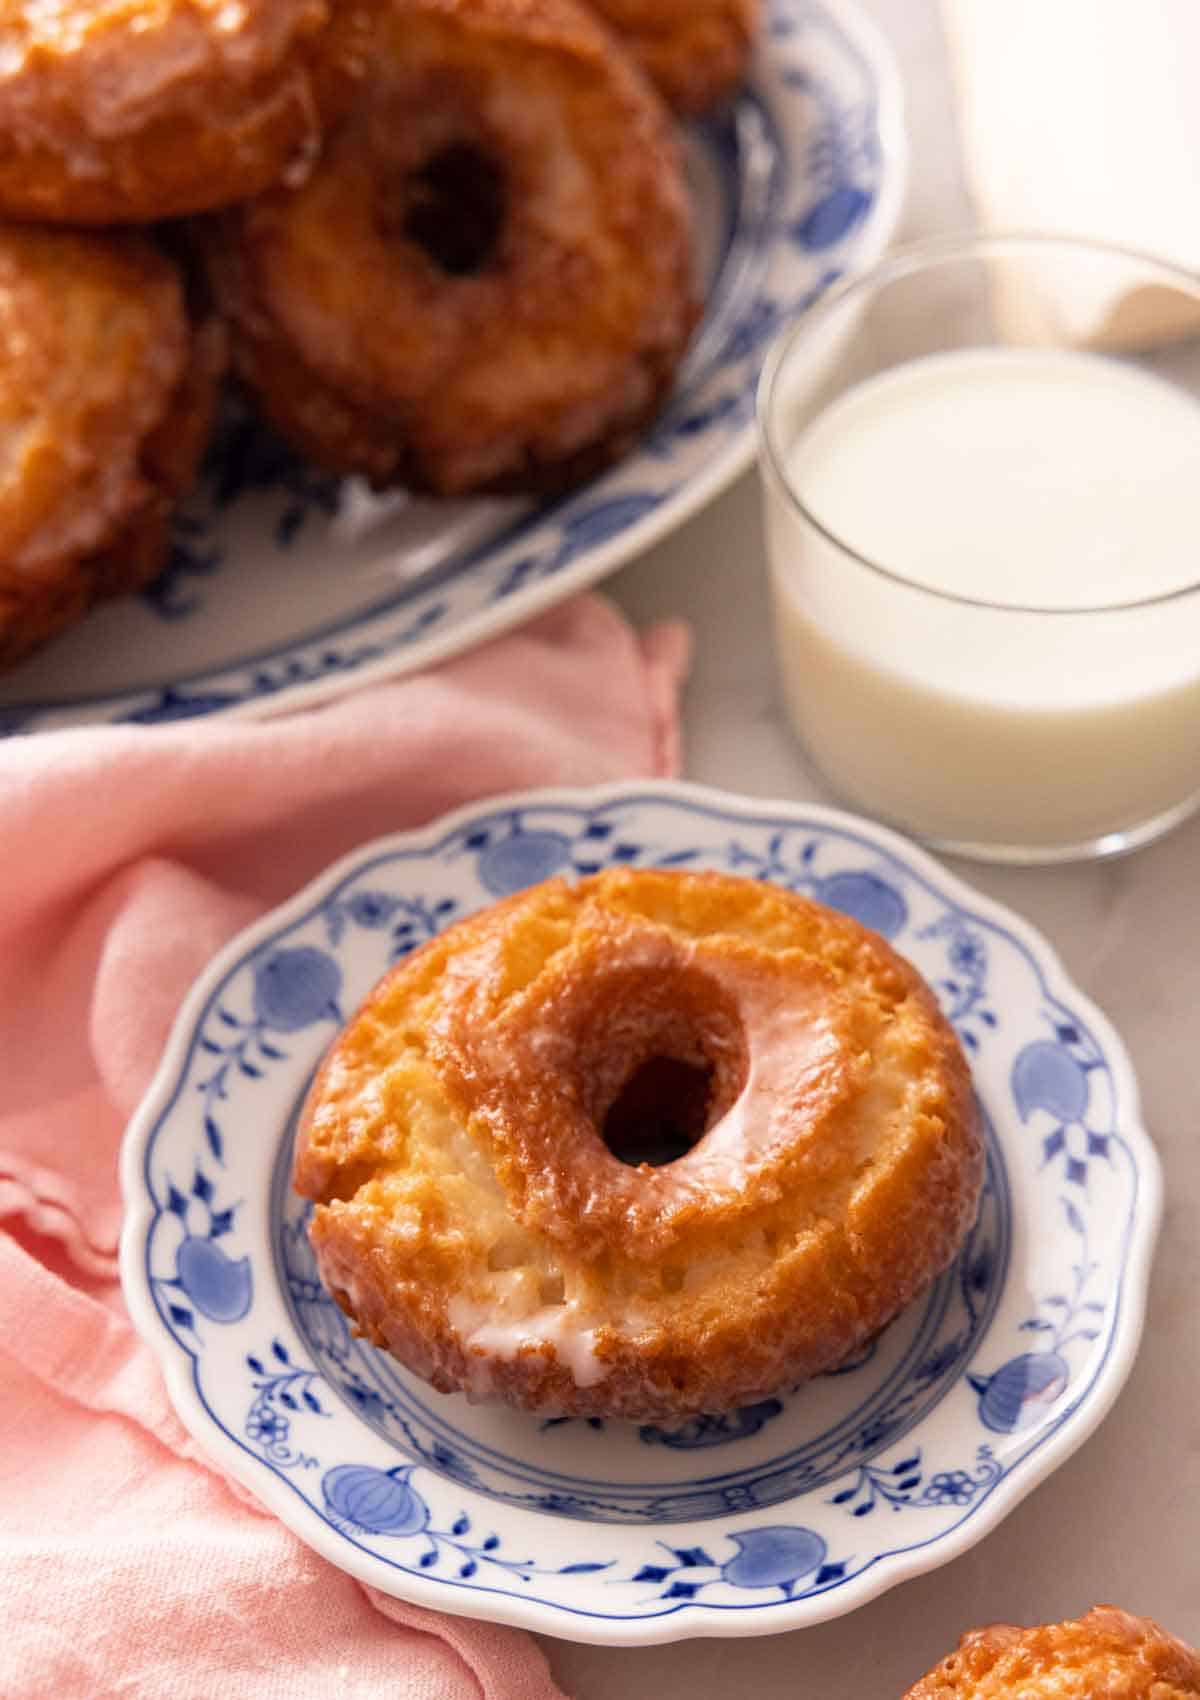 A plate with an old fashioned donut in front of a glass of milk.